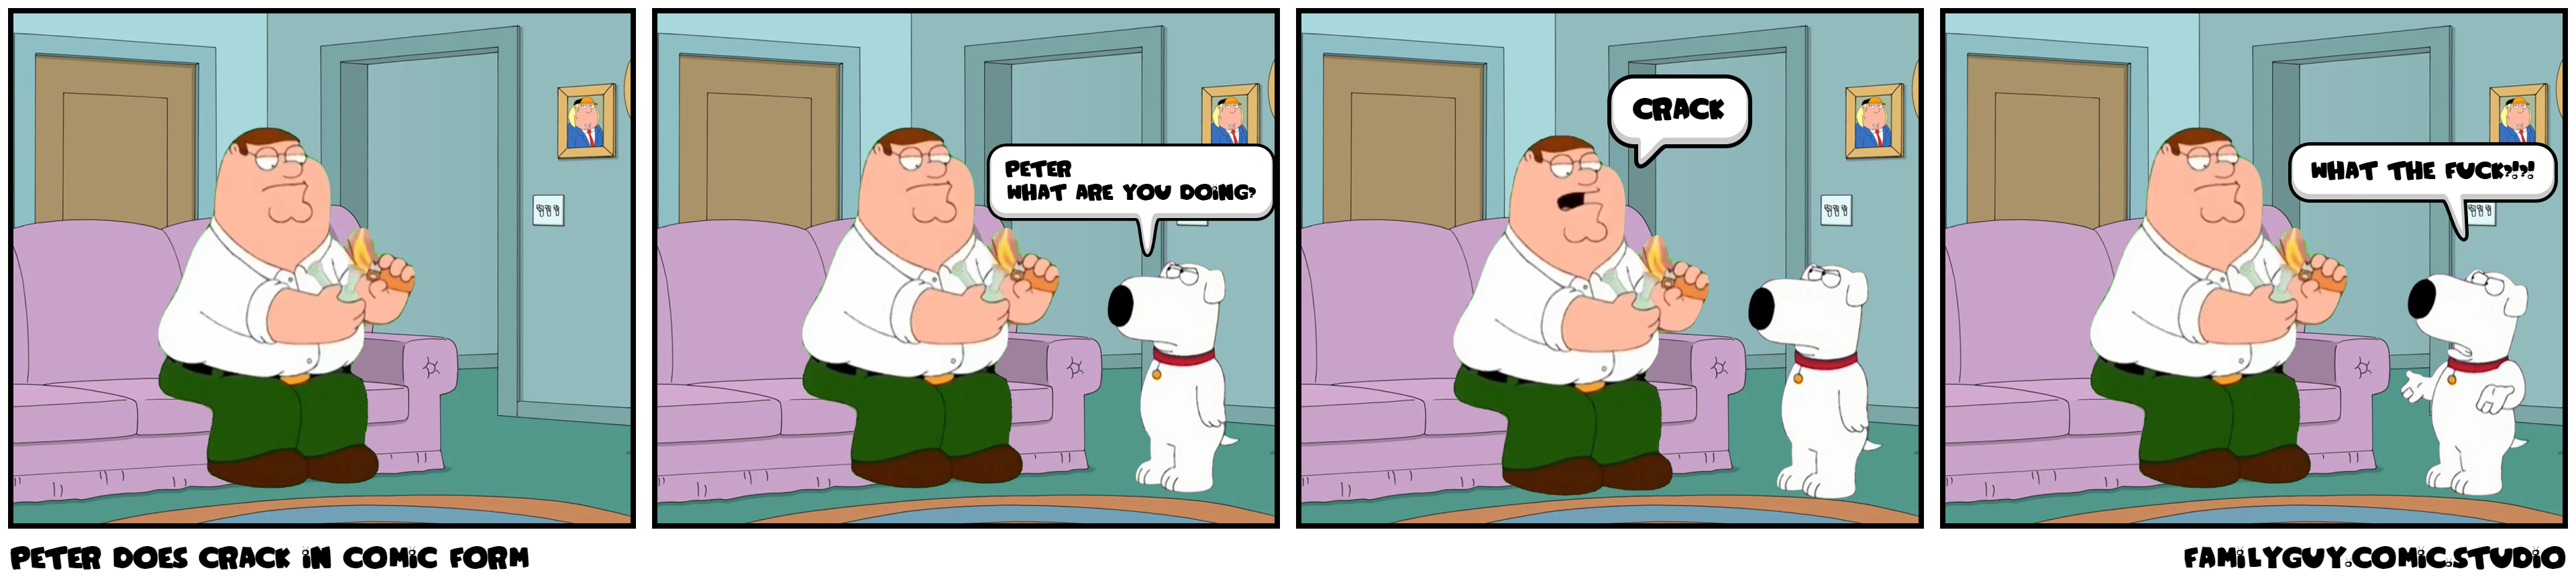 Peter does crack in comic form